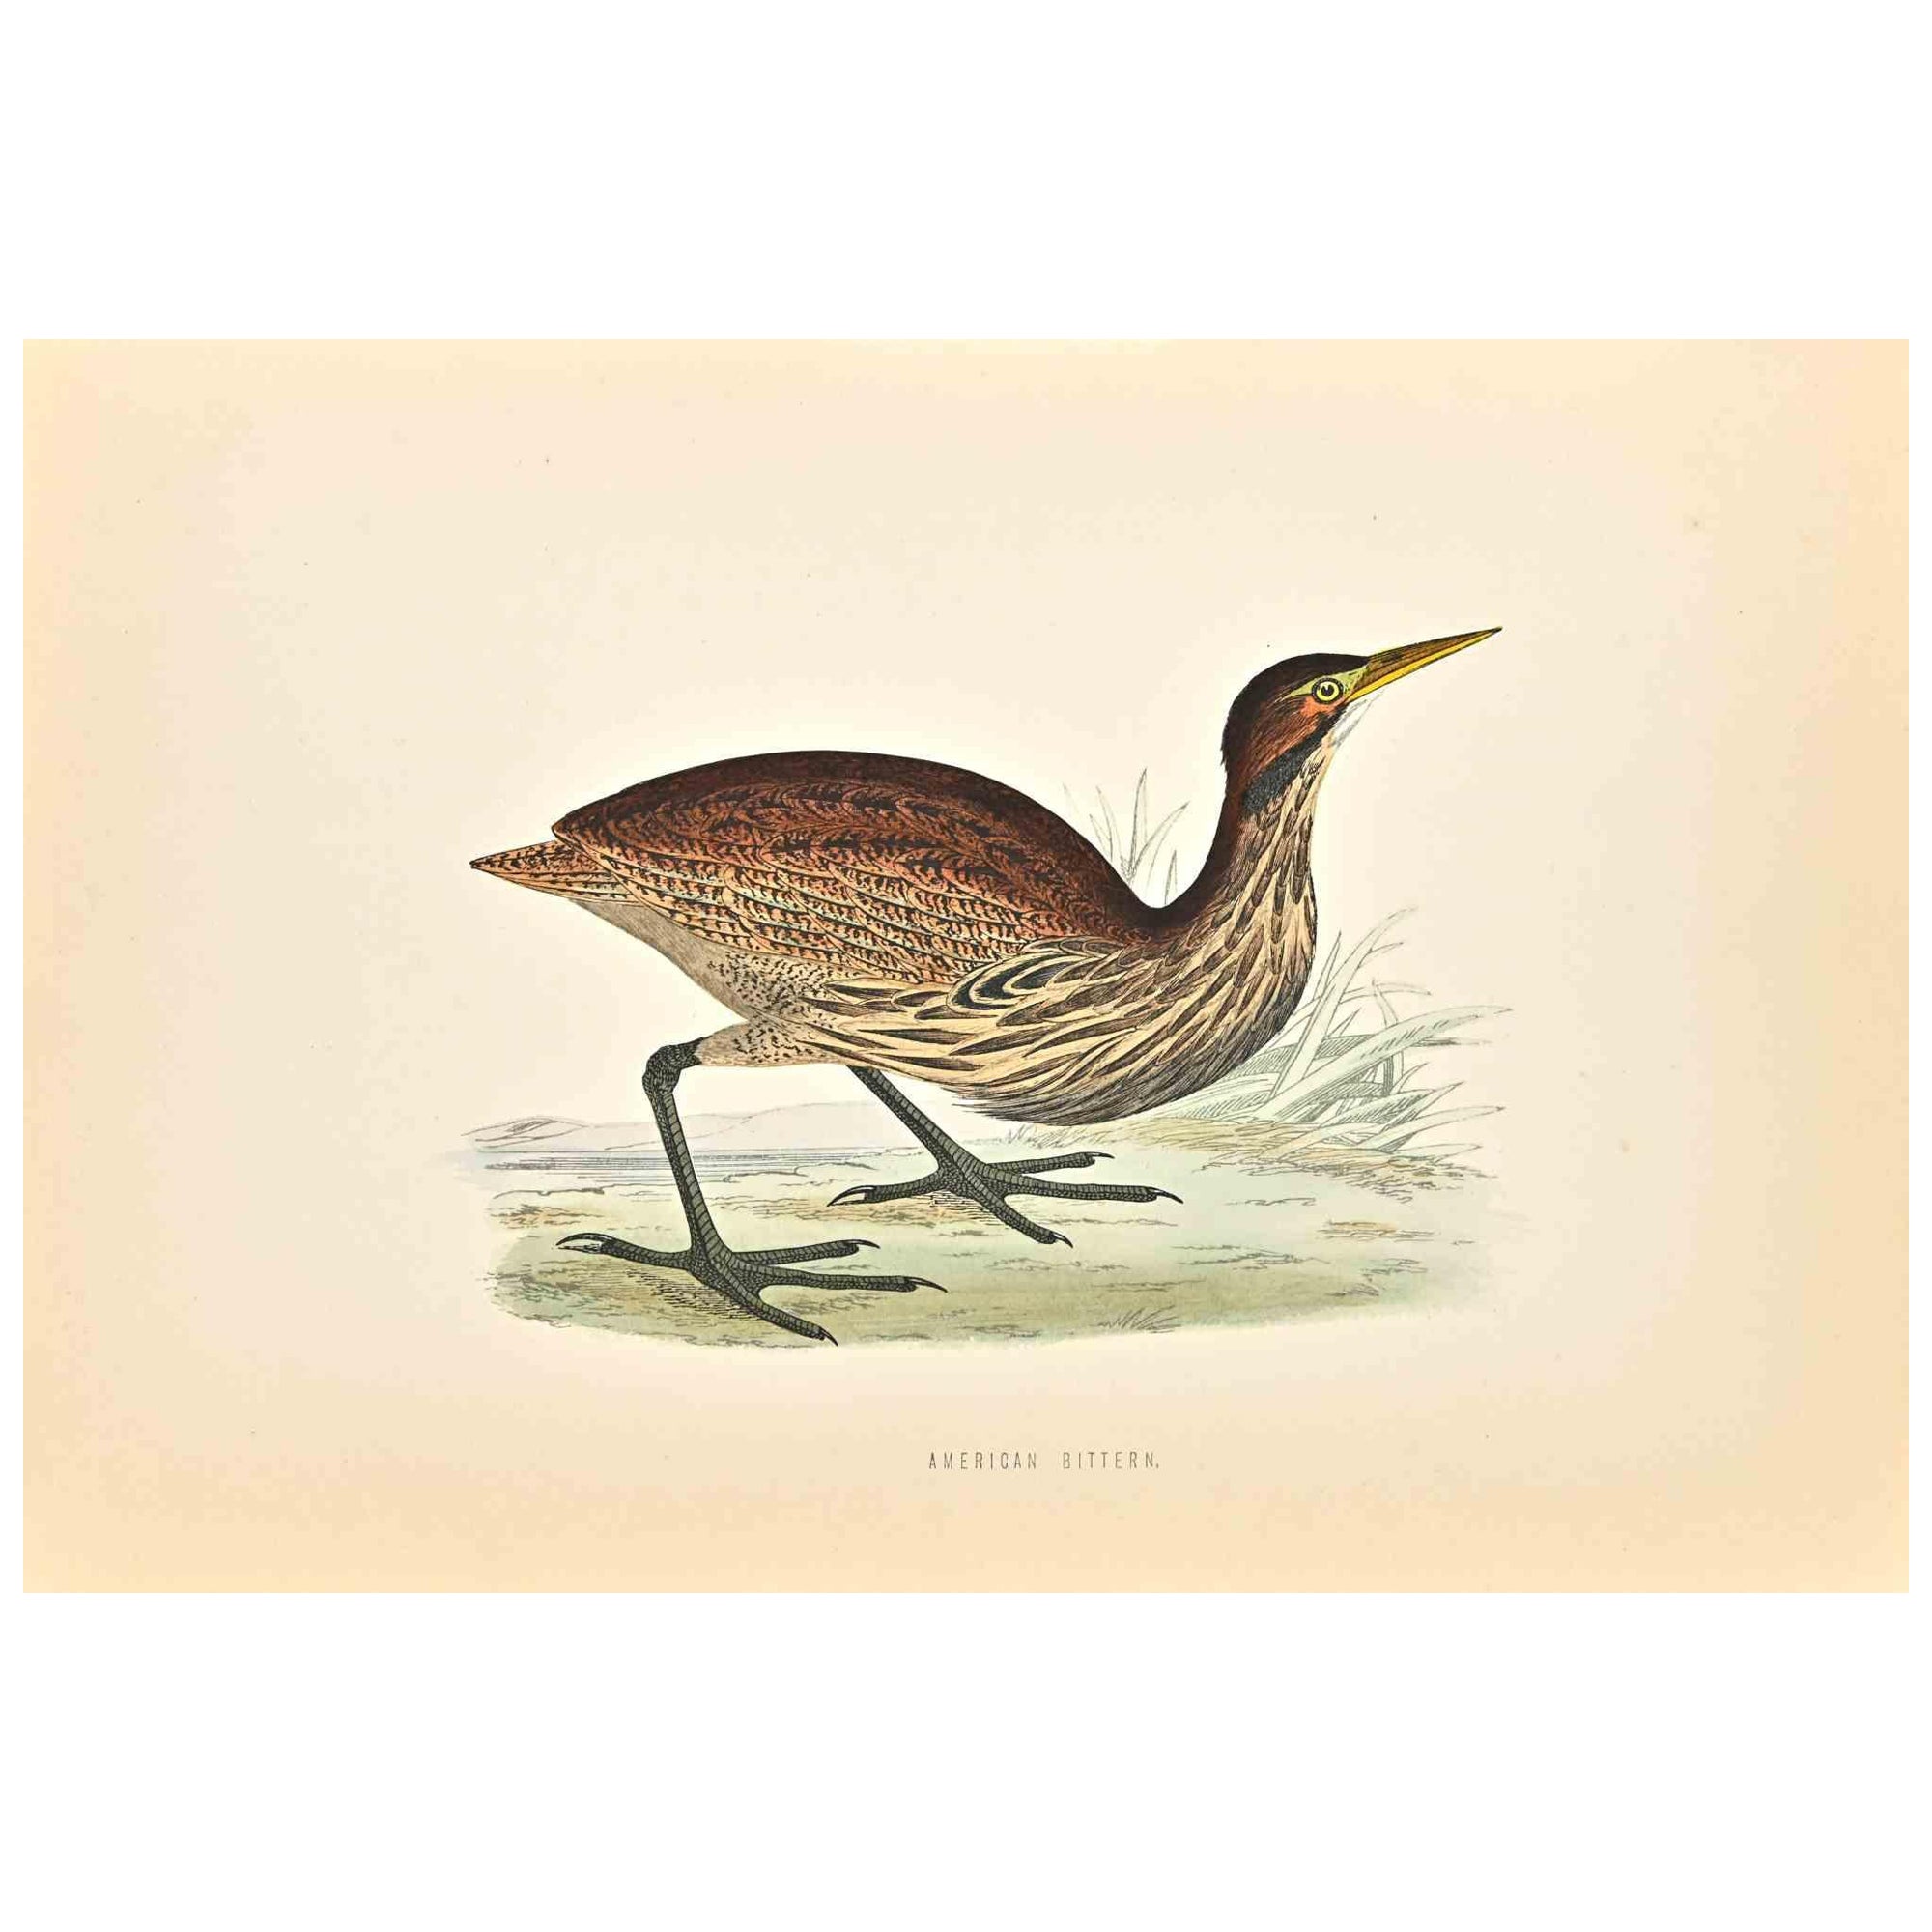 American Bittern is a modern artwork realized in 1870 by the British artist Alexander Francis Lydon (1836-1917).

Woodcut print on ivory-colored paper.

Hand-colored, published by London, Bell & Sons, 1870.  

The name of the bird is printed on the